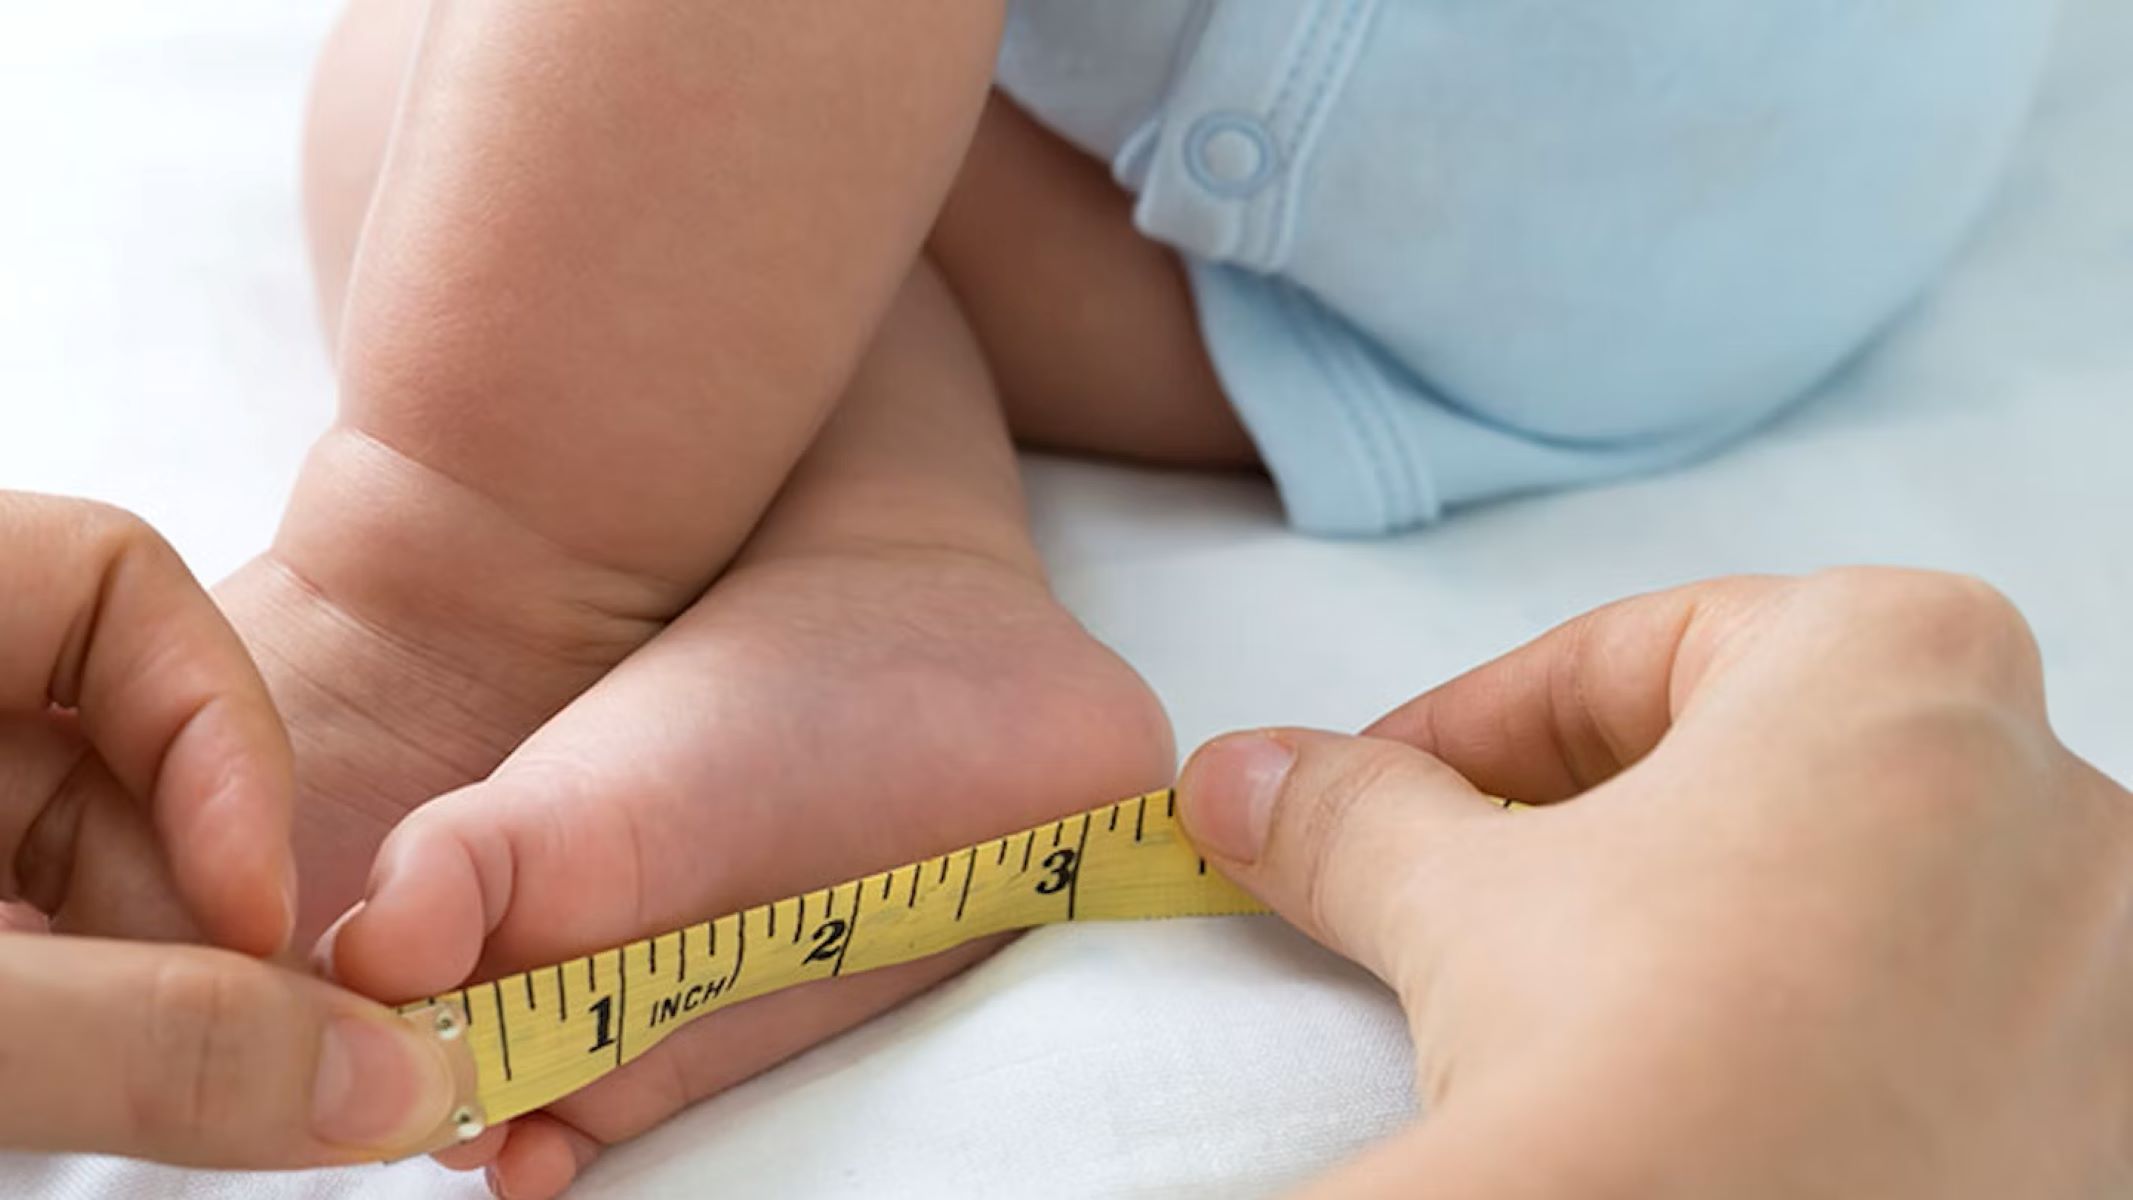 How To Measure Foot Size With Measuring Tape